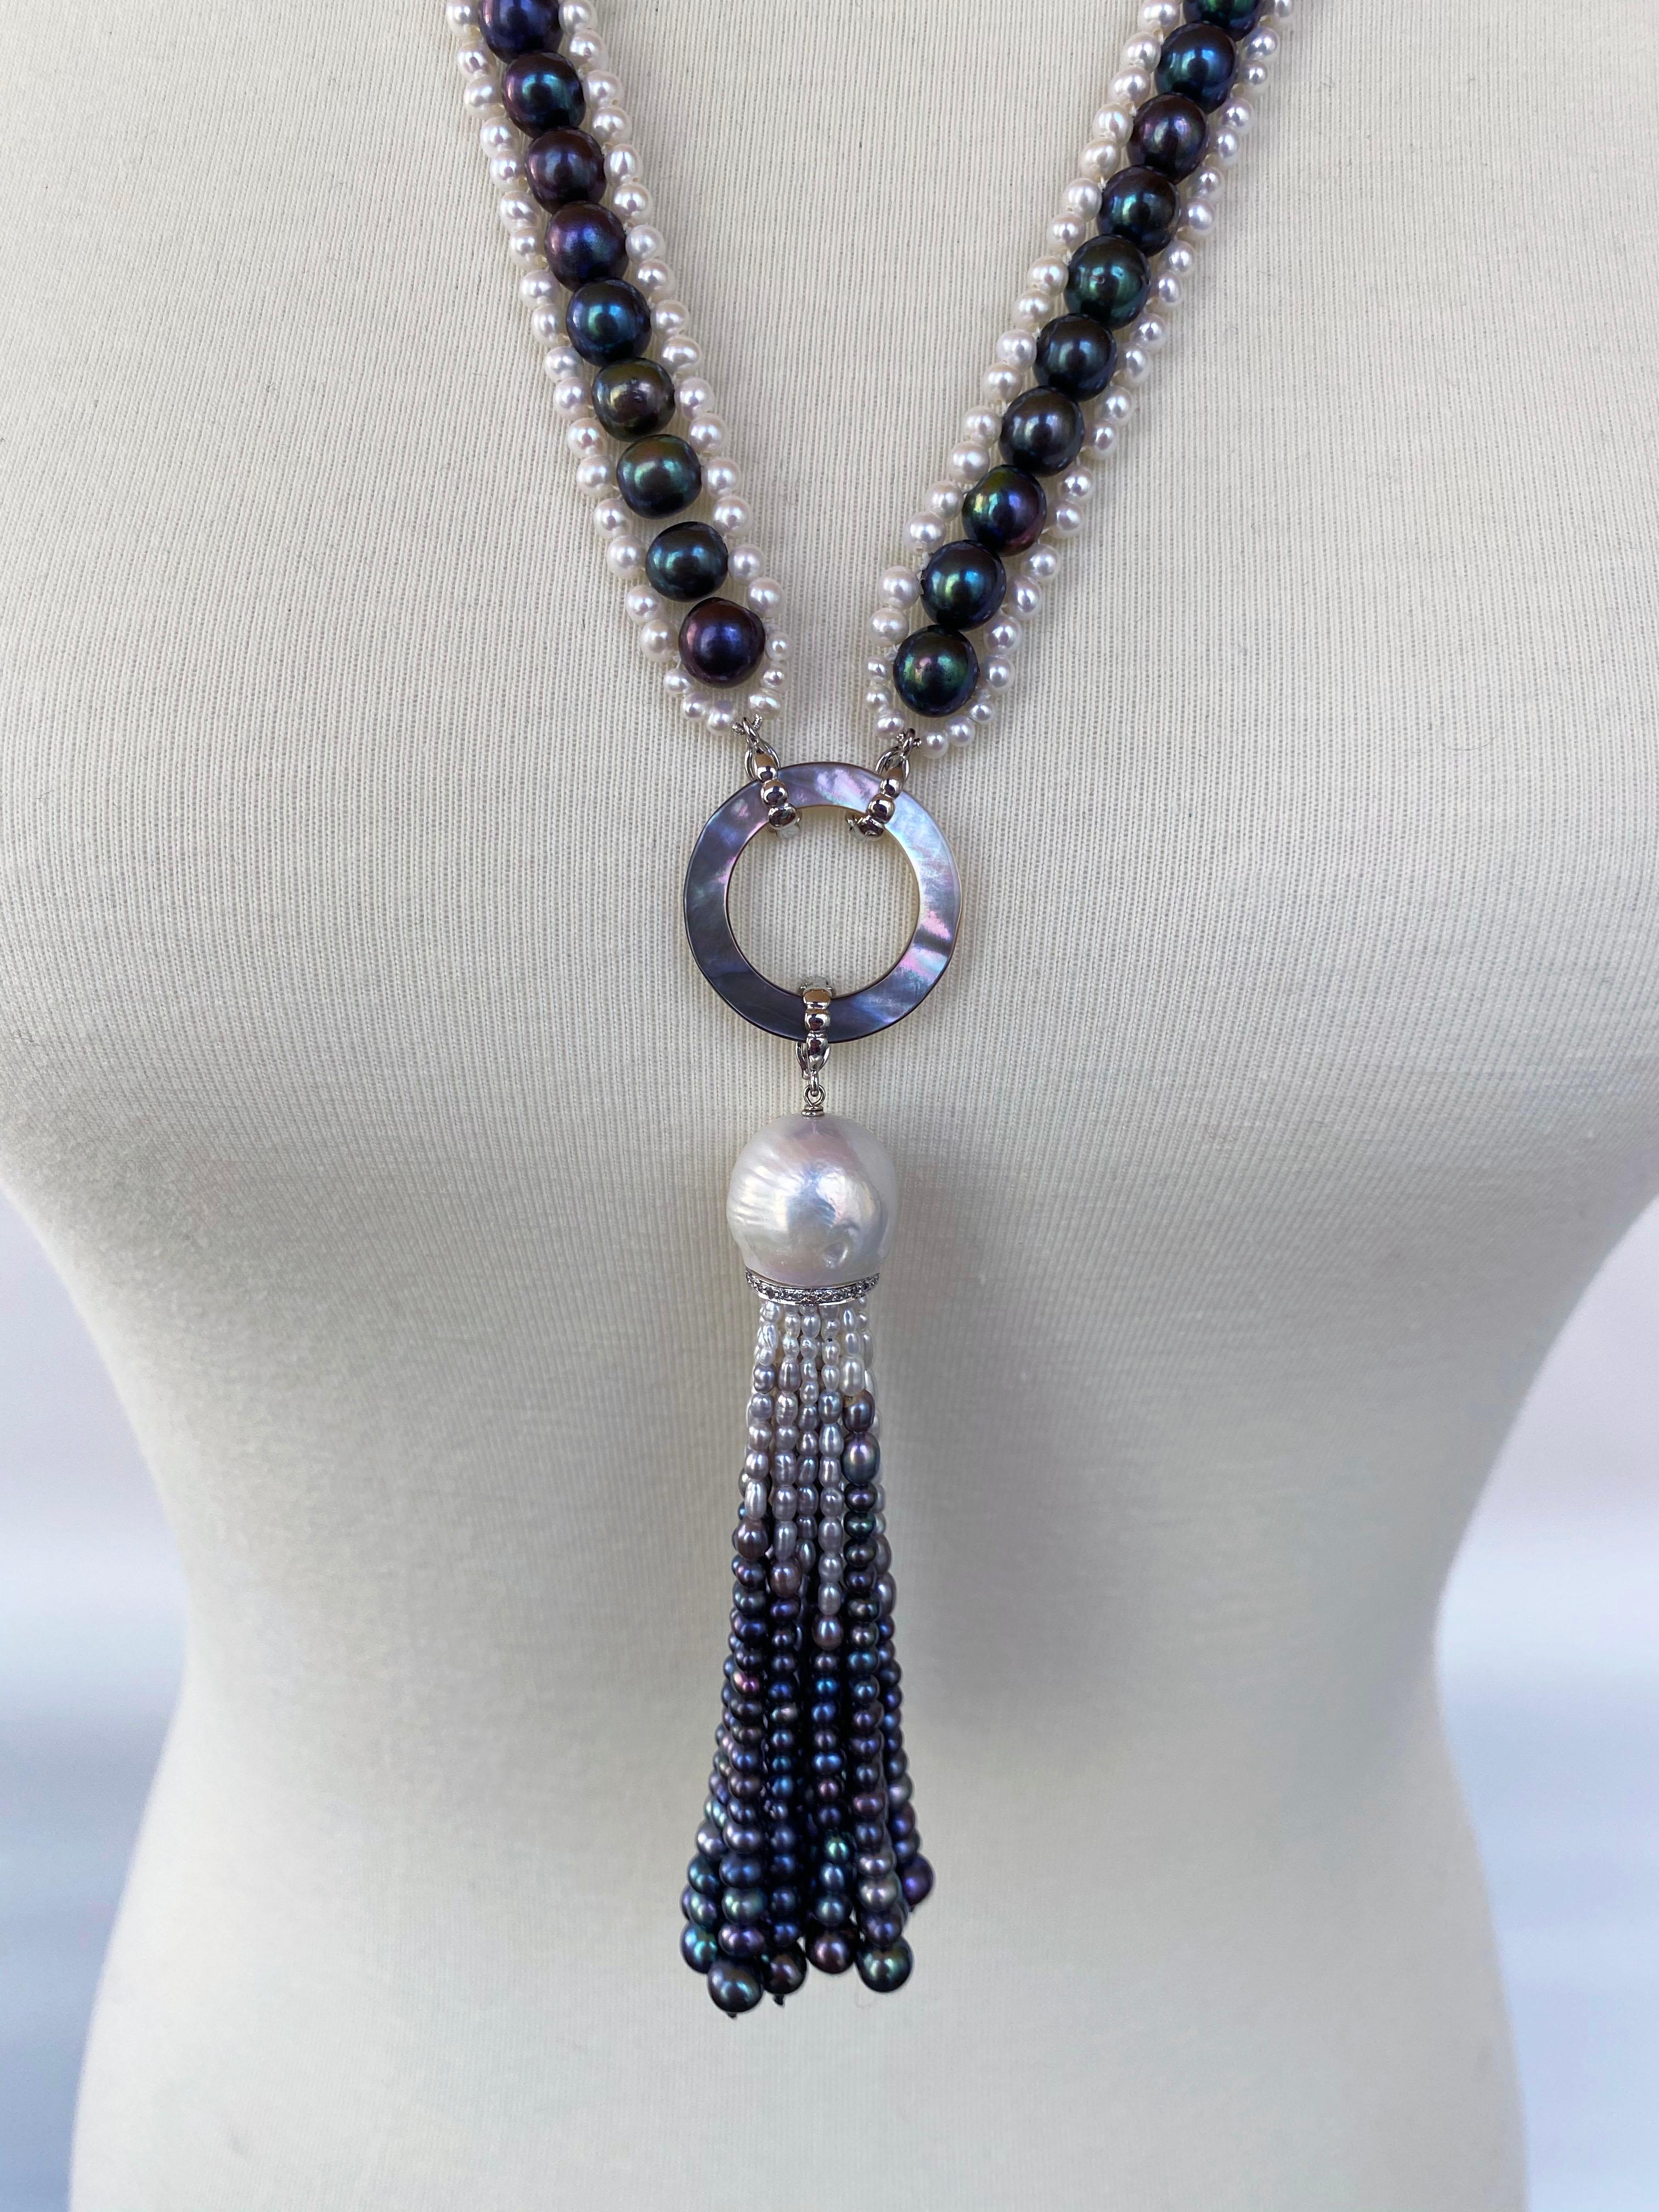 Bead Marina J. Black and White Woven Pearl Sautoir with Abalone Shell & Ombre Tassel